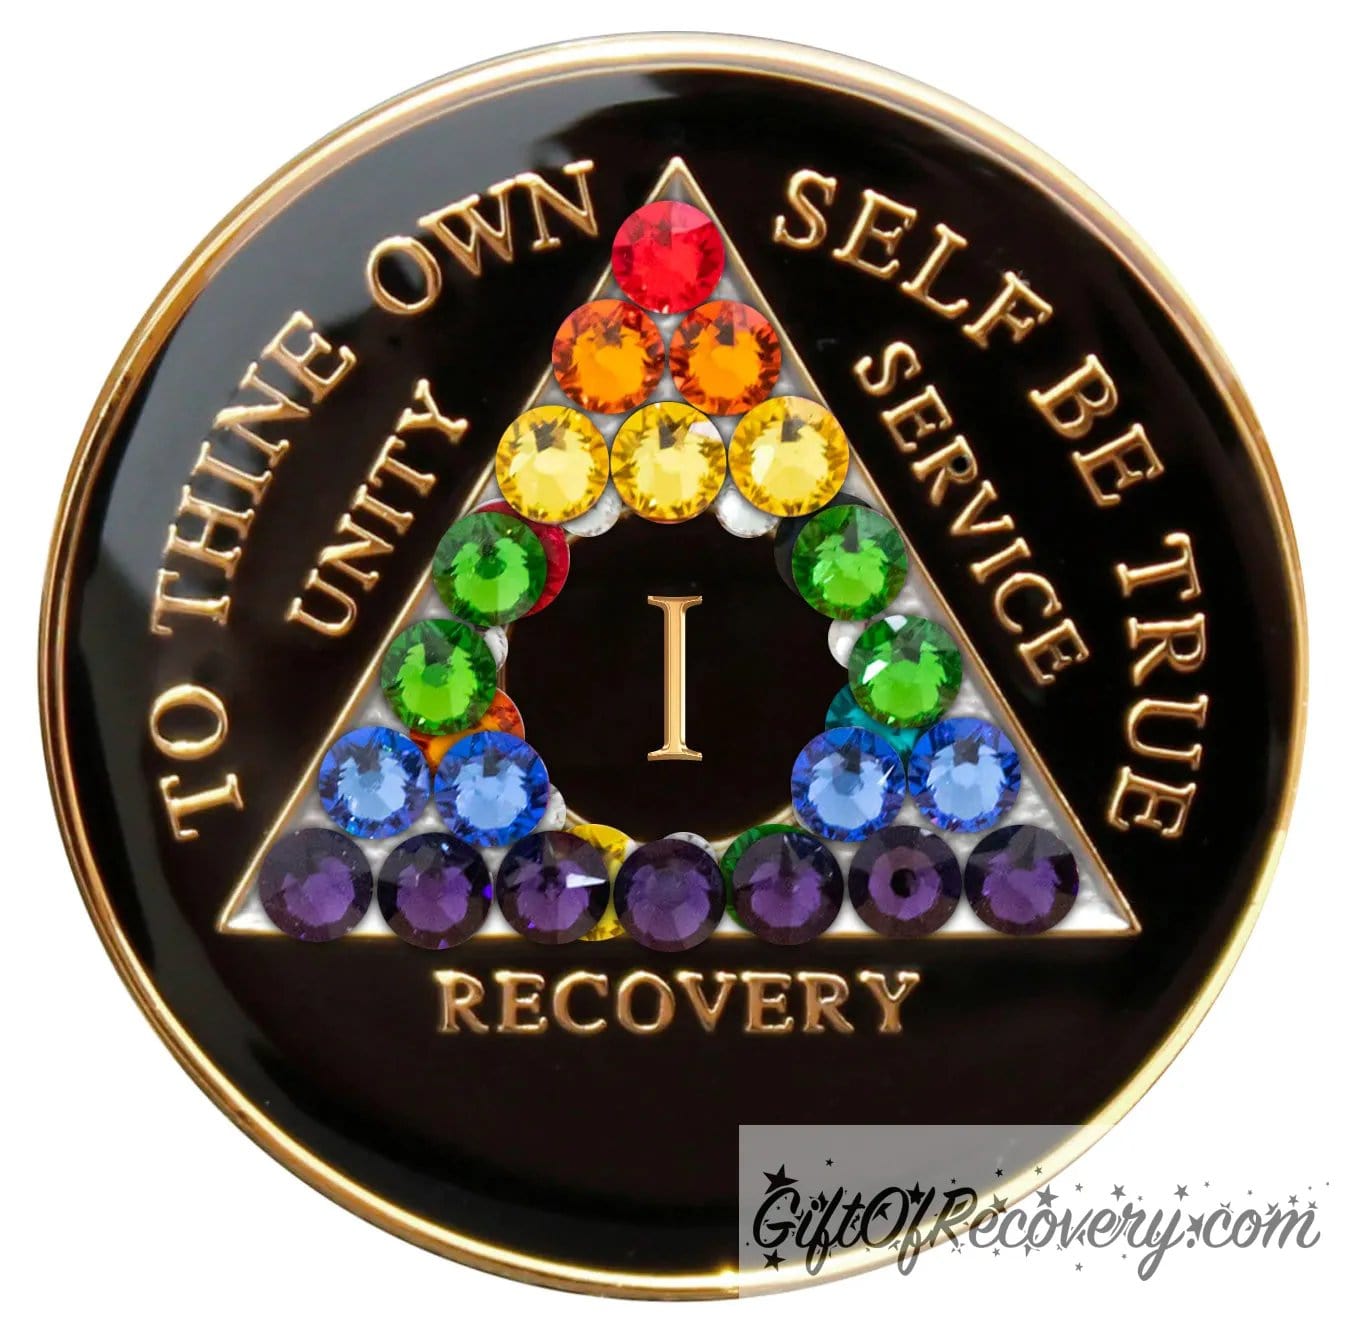 1 year AA medallion with 21 rainbow genuine crystals to represent the LBGTQIA+ community, show your pride with this Black onyx resin sealed recovery medallion that has 14k gold plated brass lettering of to thine own self be true, unity, service, recovery, and the roman numeral.